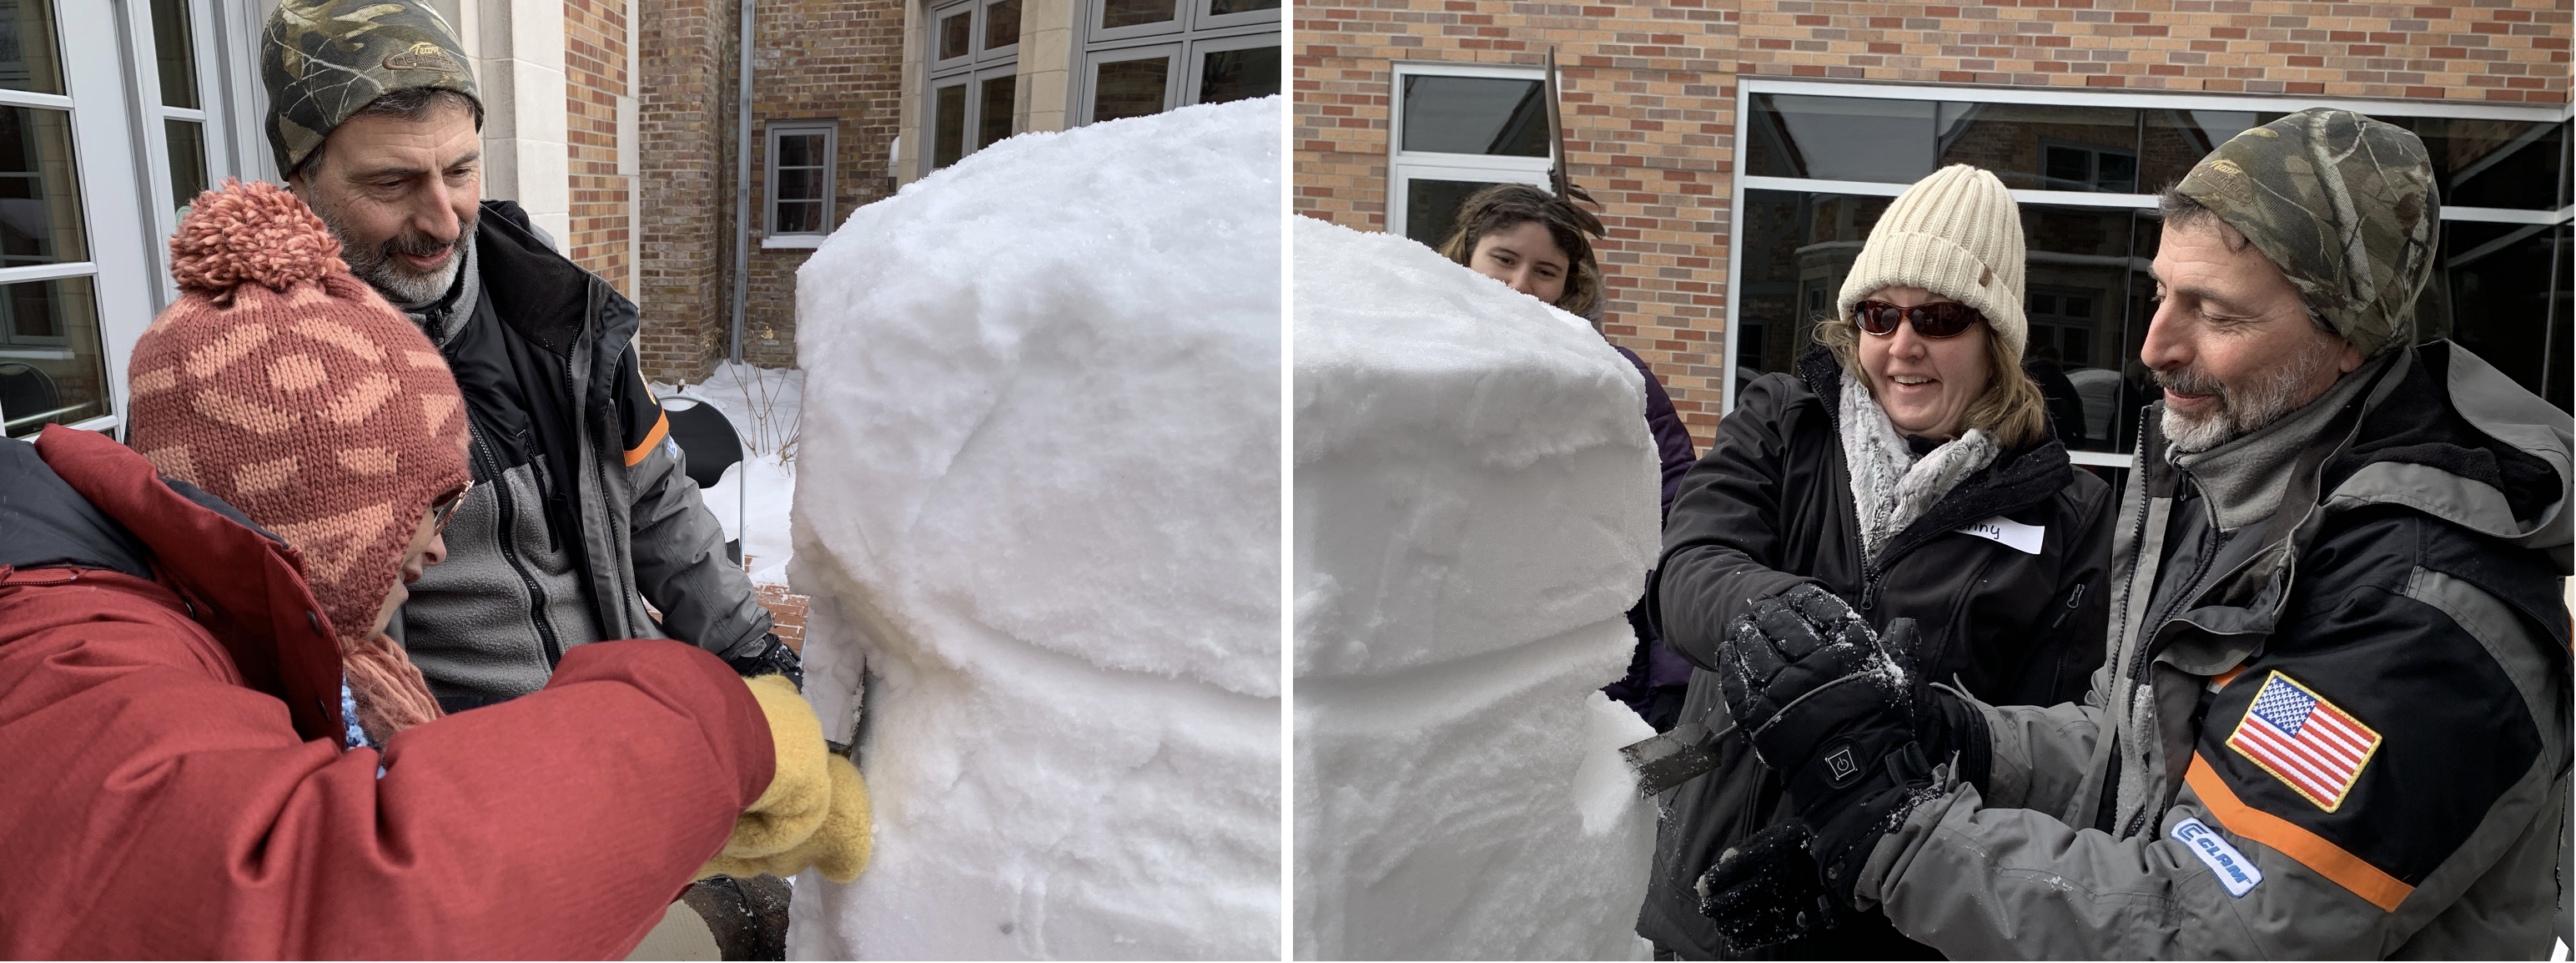 Two side-by-side photographs of Art Beyond Sight participants carve a block of snow with sculptor Mike Martino outside the Museum's main entrance.